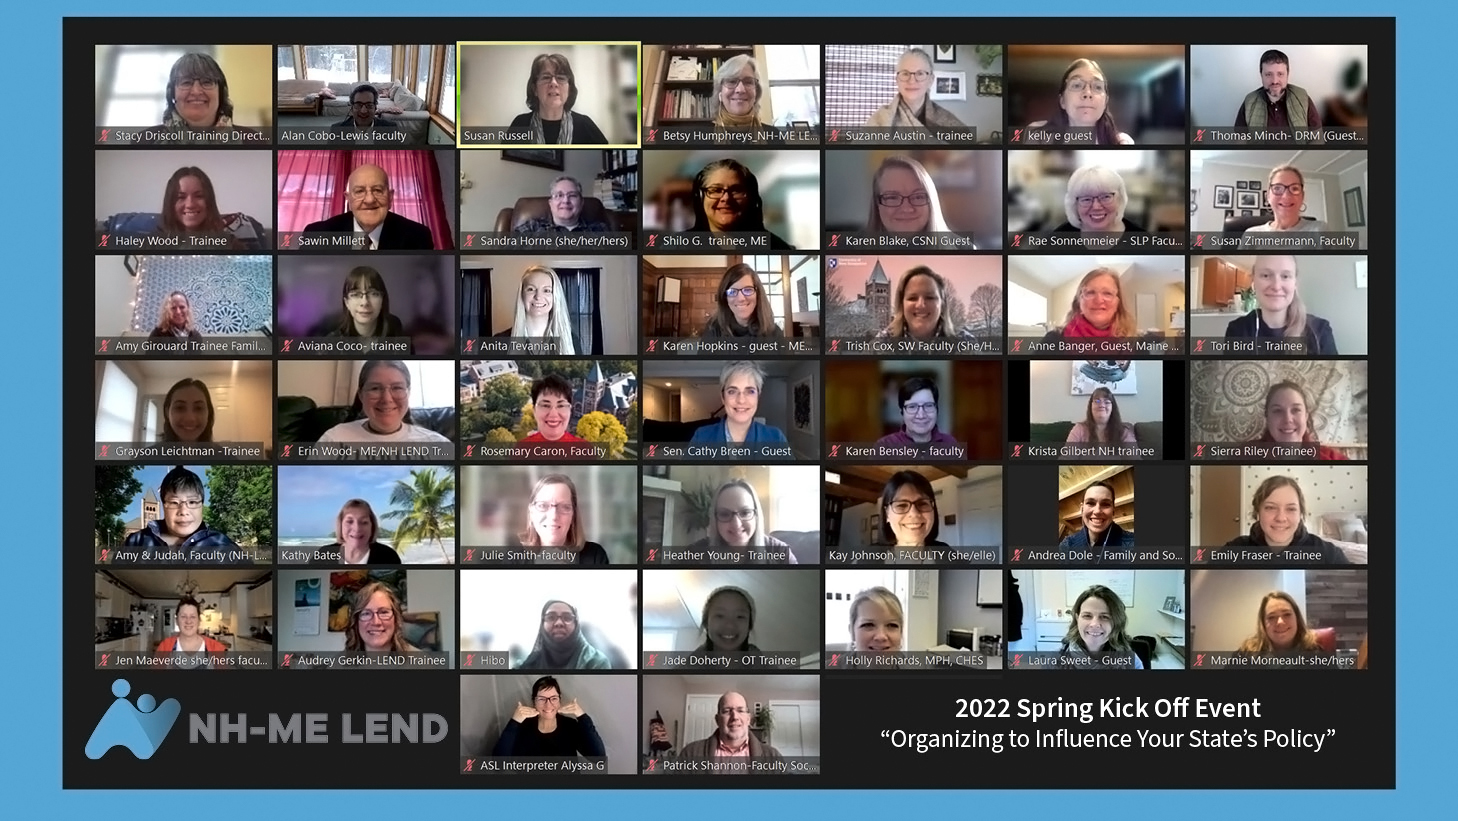 Zoom group screenshot of 44 people with the NH-ME LEND logo and text, 2022 Spring Kick Off Event "Organizing to Influence Your State's Policy"